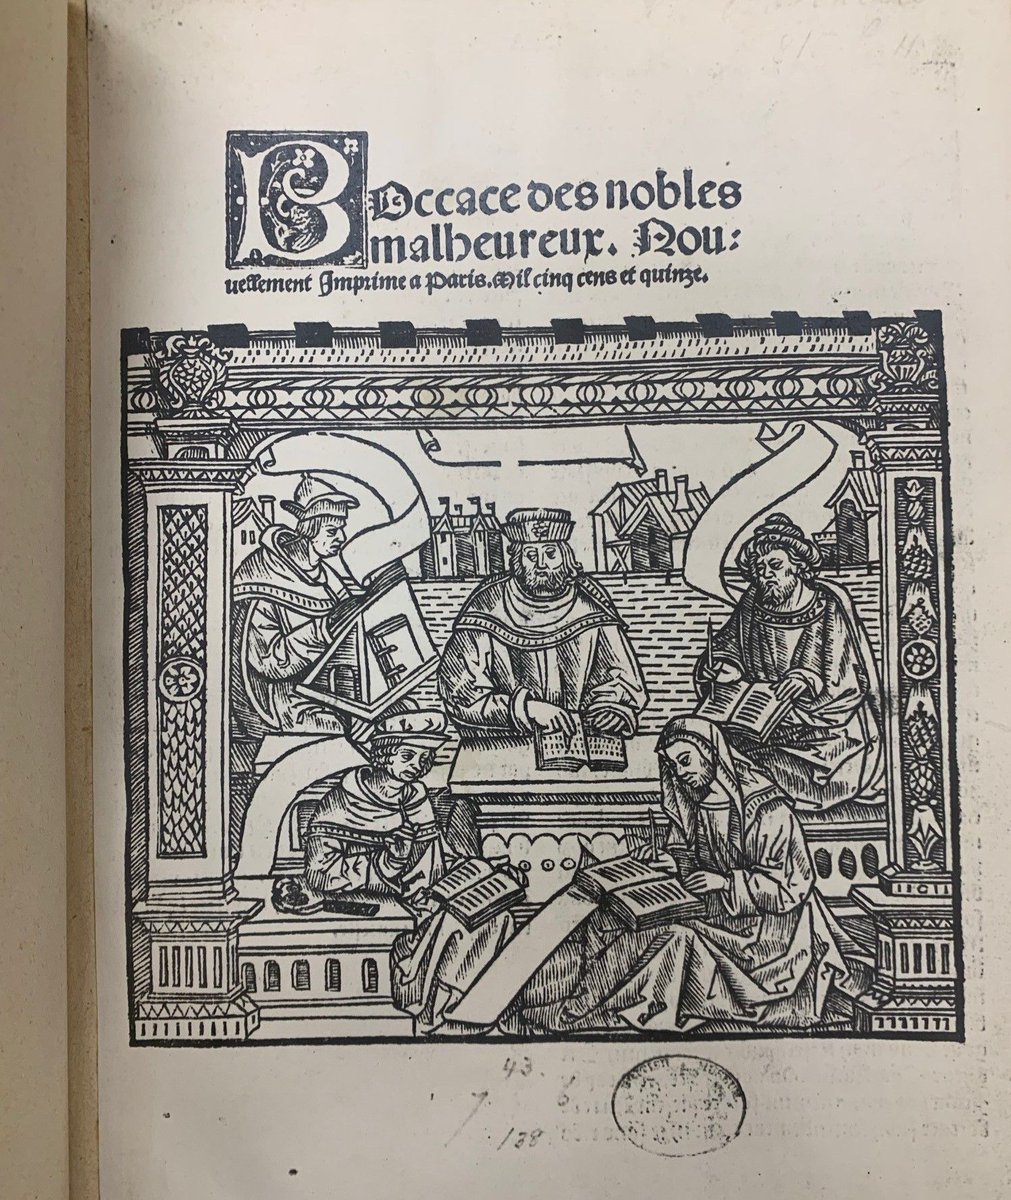 X is for Xylography - the art of making woodcuts or wood engravings and popular in early printed books for borders, printer's marks, and sometimes images. #ArchivesAtoZ